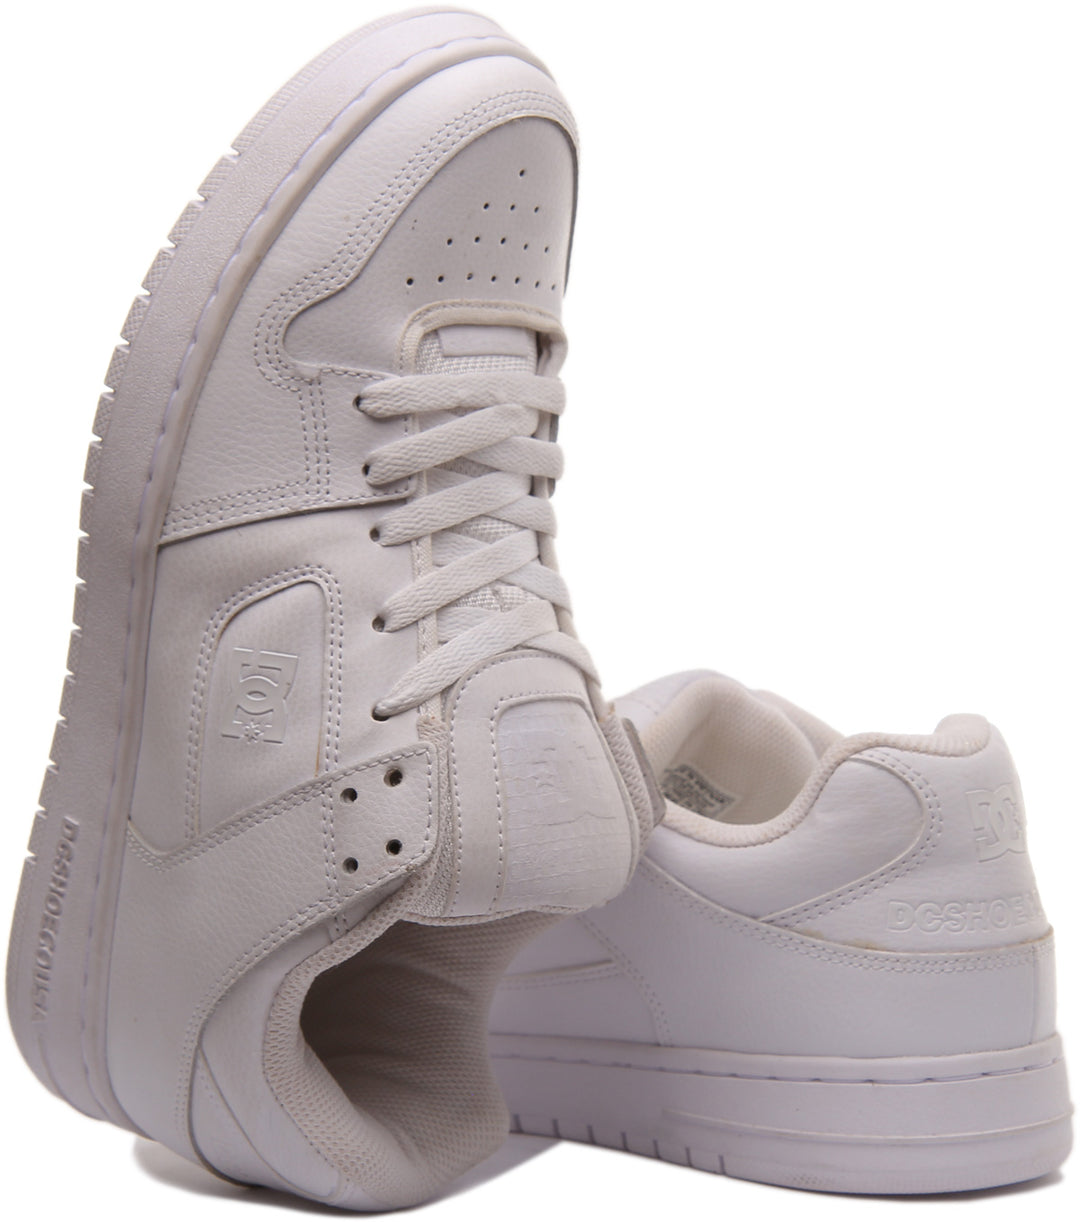 Dc Shoes Manteca In White